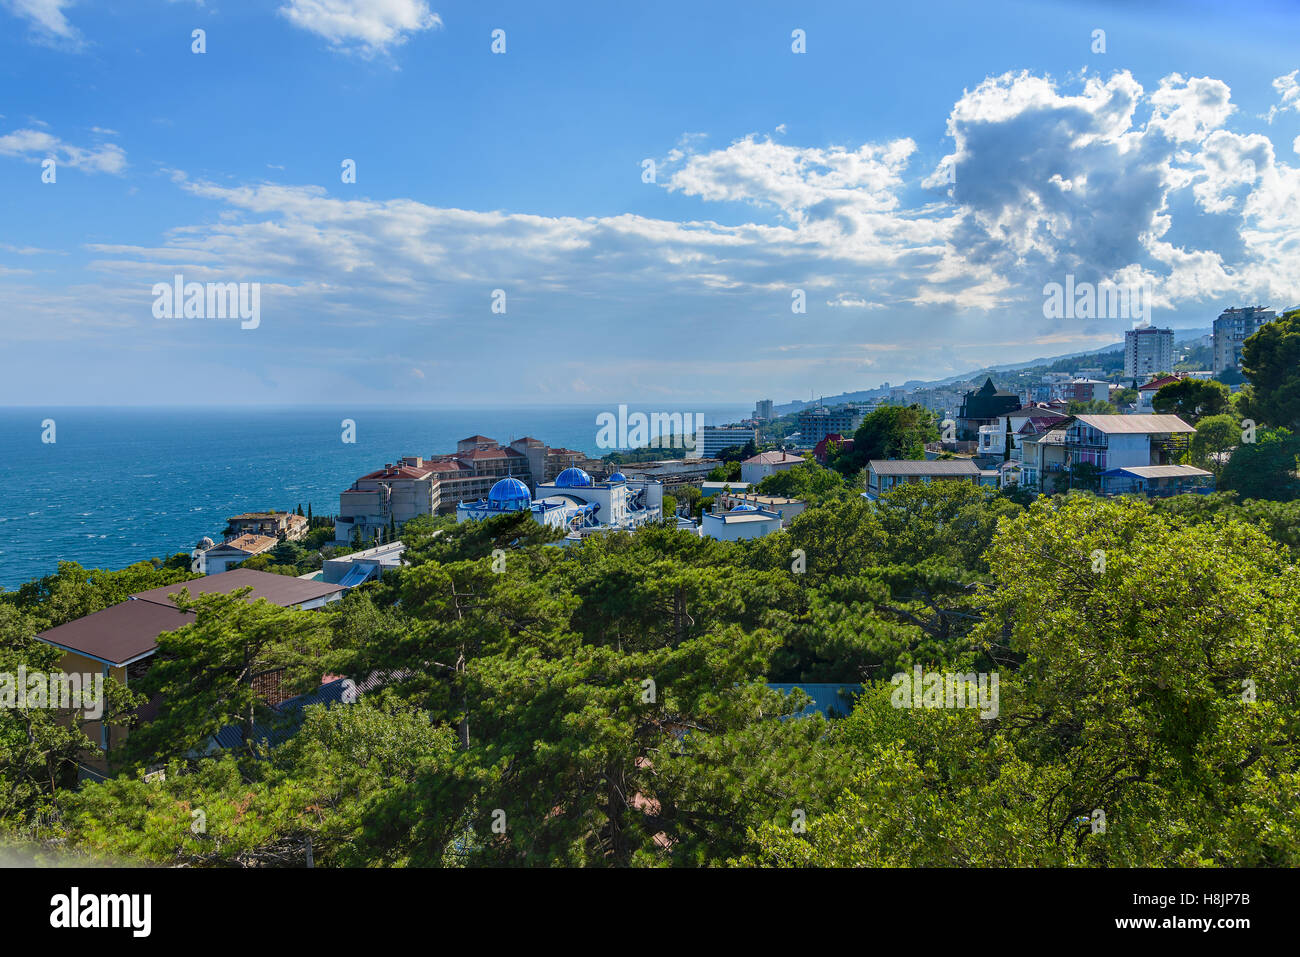 City by the Sea, a top view Stock Photo